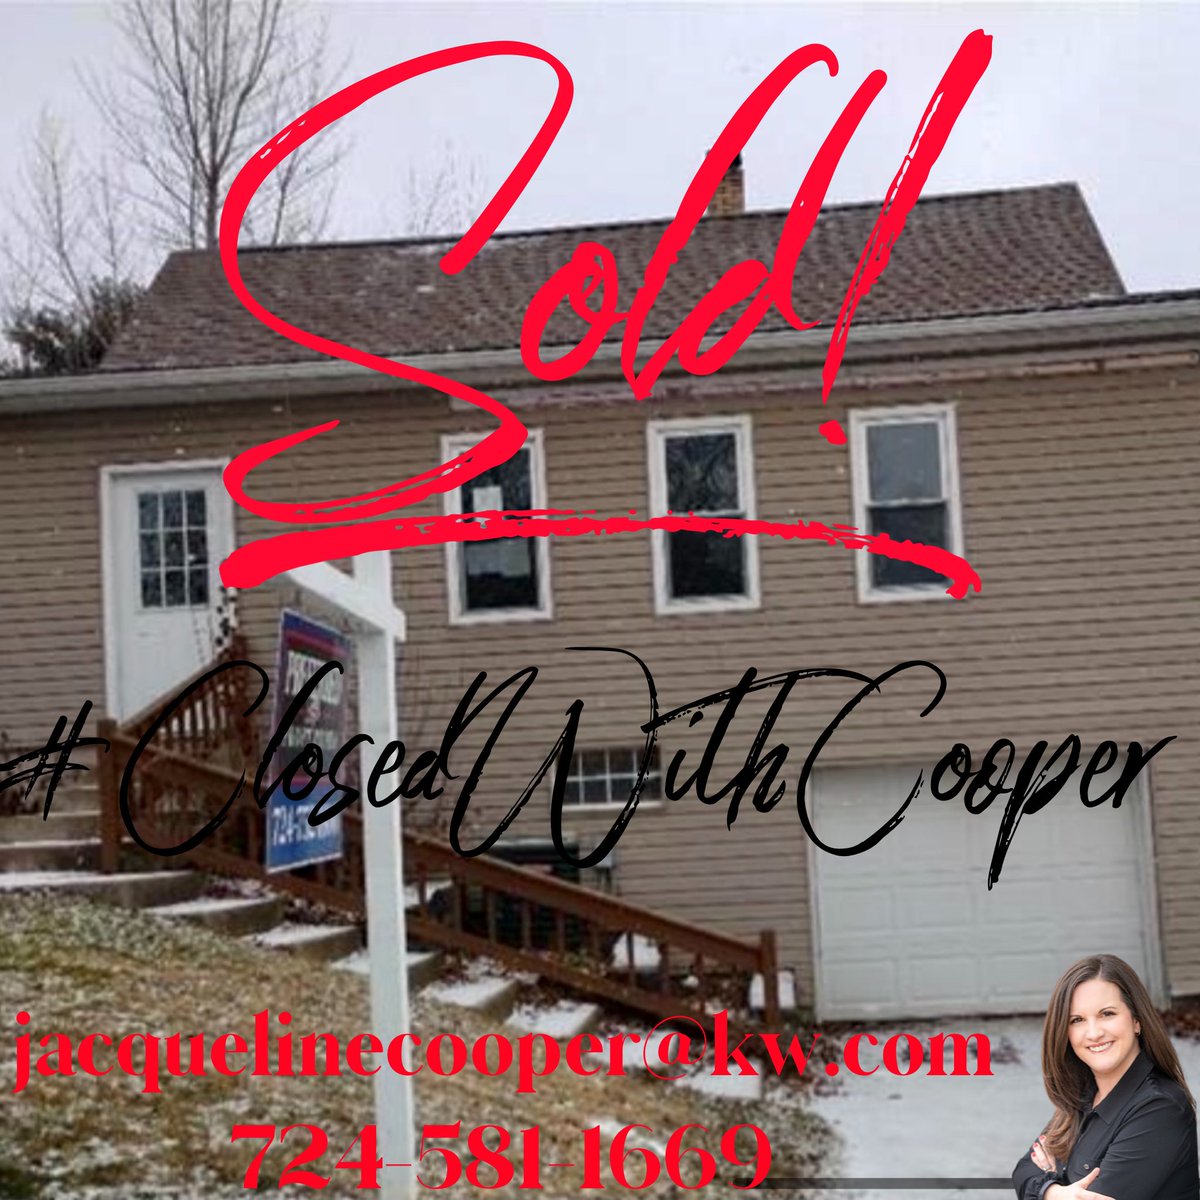 Congrats to the Taylor’s on purchasing their first home!#ClosedWithCooper #KellerWilliams #BetOnRed #BeaverCounty #LawrenceCounty #BuyersAgent #ListingAgent #WesternPA #RealEstate #SoldAndClosed #EllwoodCity 
☎️724-581-1669
💻jacquelinecooper@kw.com 
🔗 jacquelinecooper.kw.com